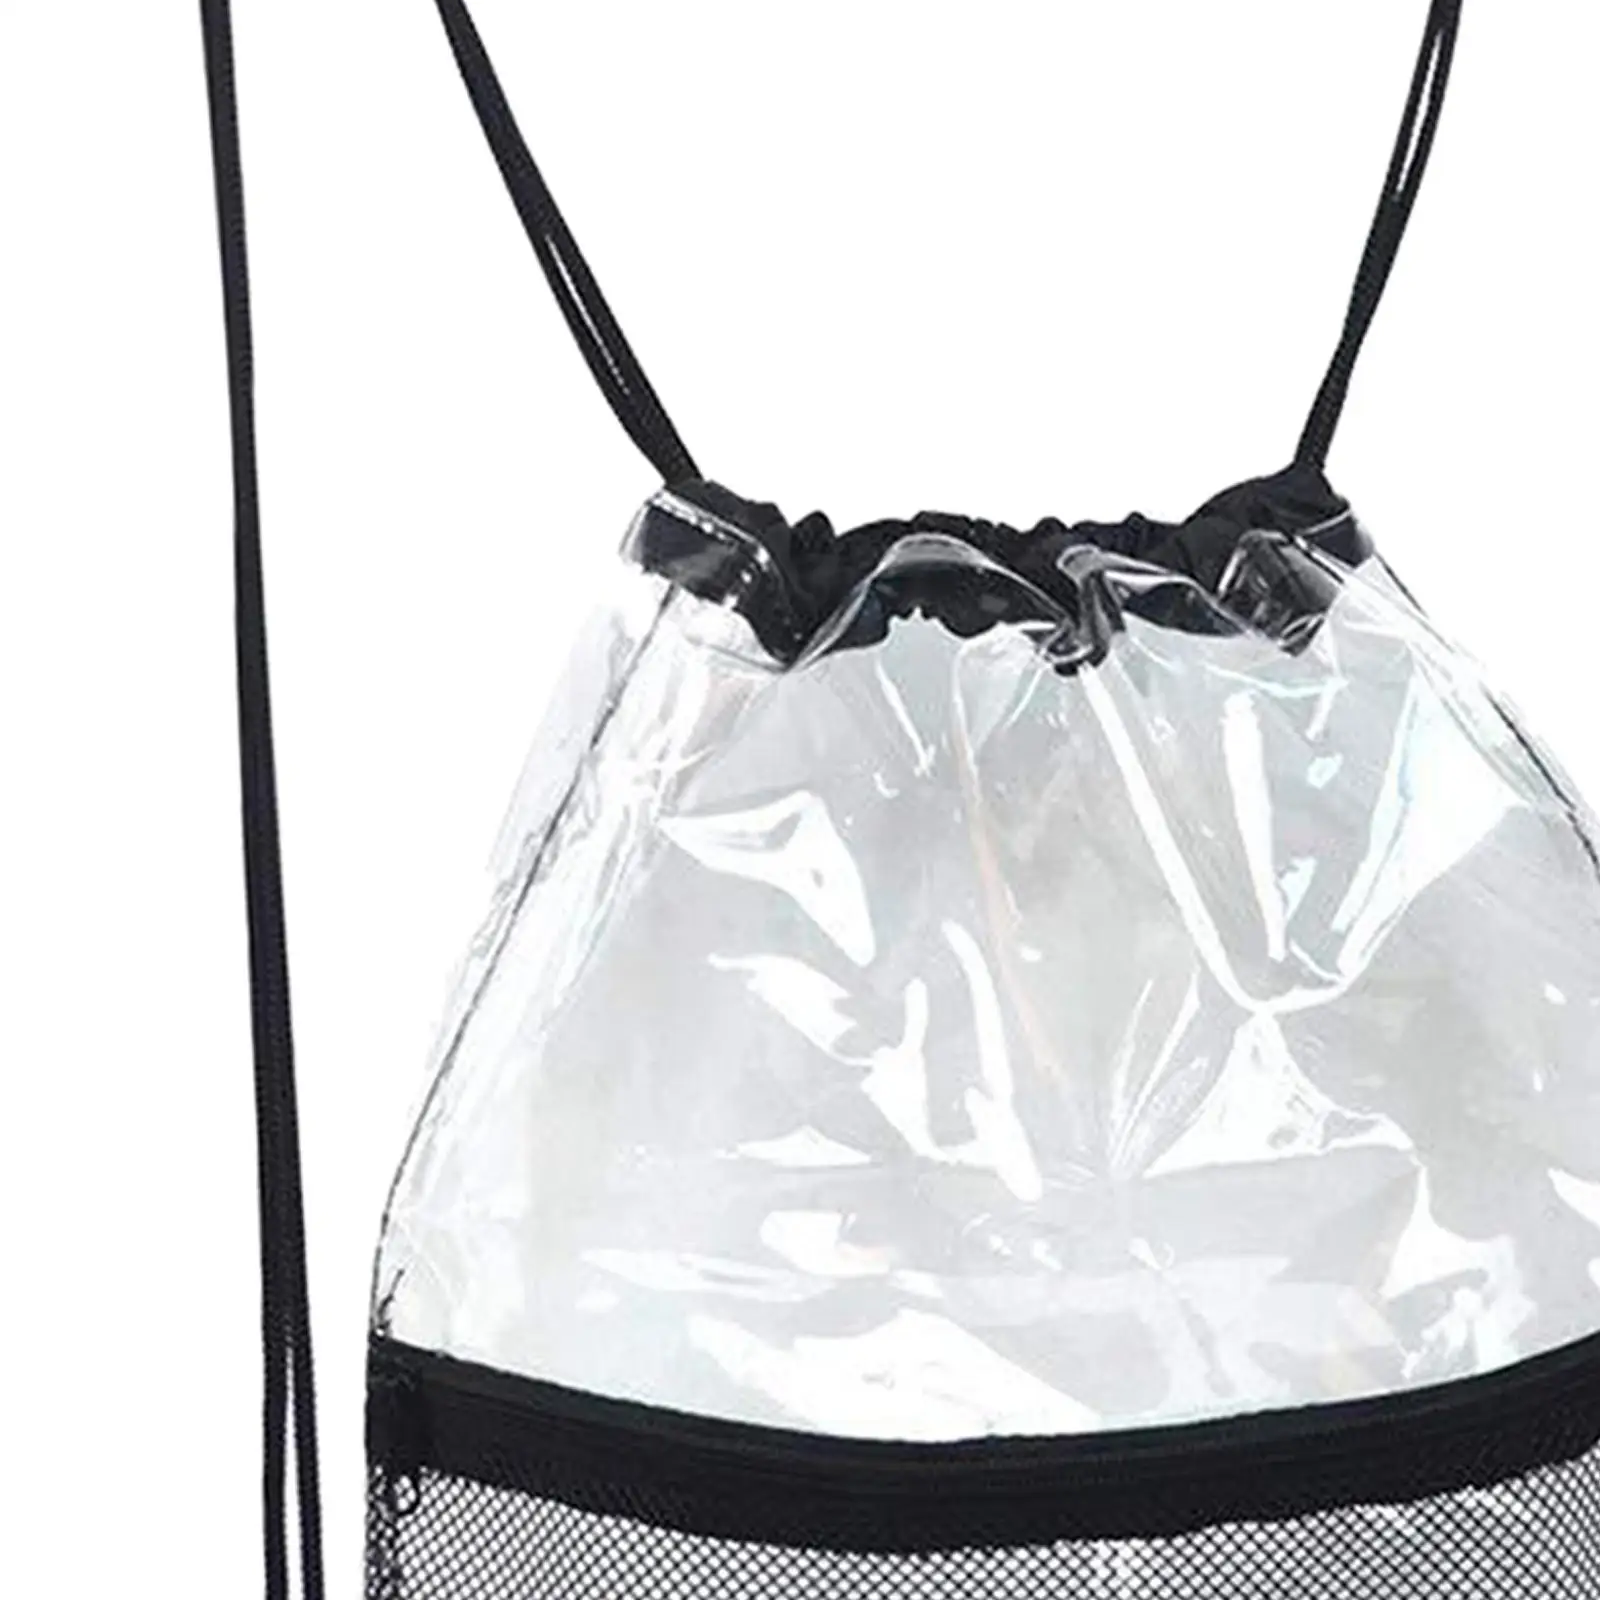 

Clear Drawstring Backbag Waterproof Lightweight Cinch Sack Small Clear Bag for Sporting Event Gym Traveling Men Women Swimming